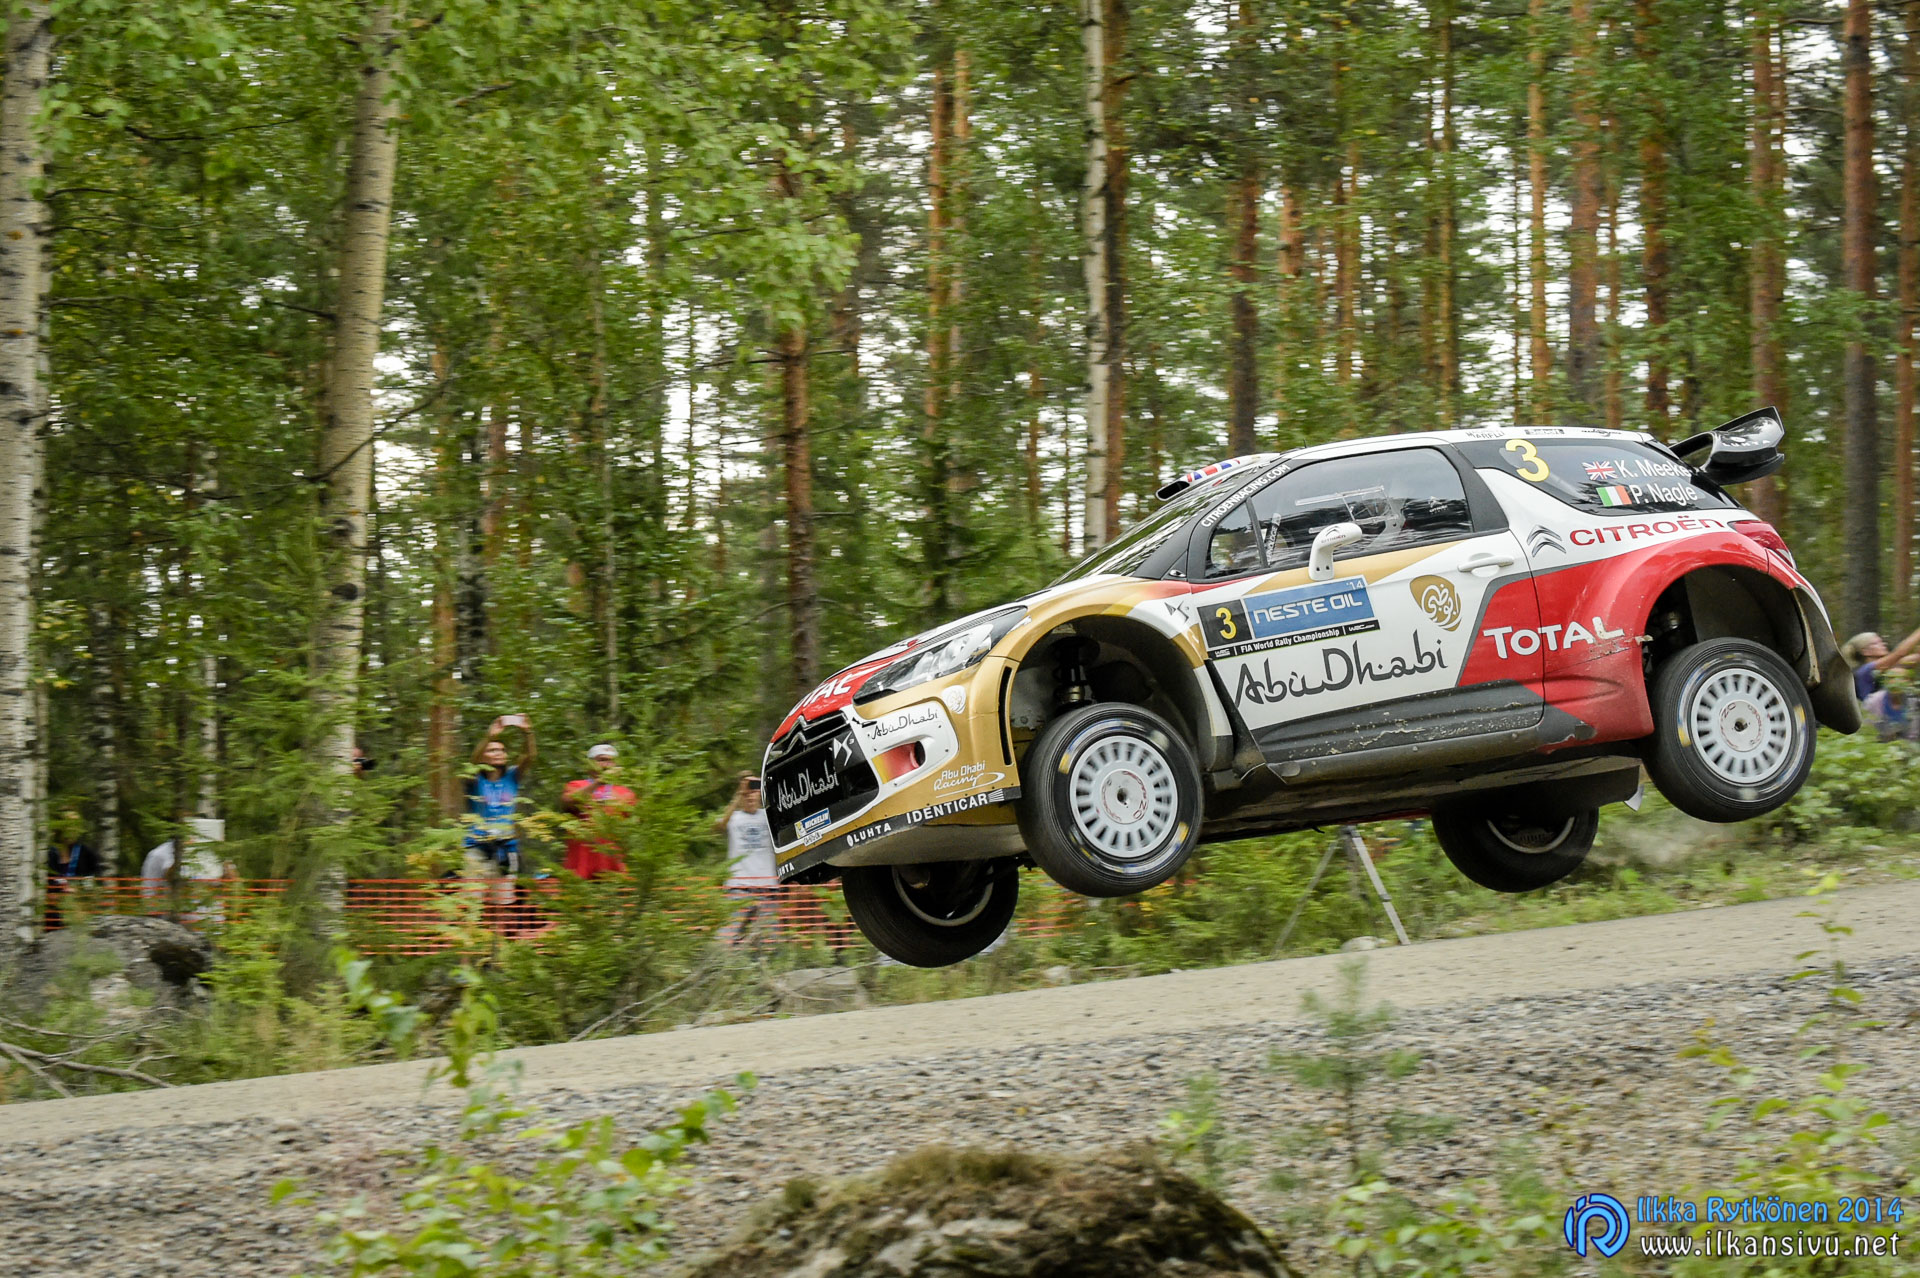 1/1250 s, f/7,1, ISO 5000, 80 mm ( AF-S Nikkor 80–400mm f/4.5-5.6G ED VR), Kris Meeke, Neste Oil Rally Finland 2014